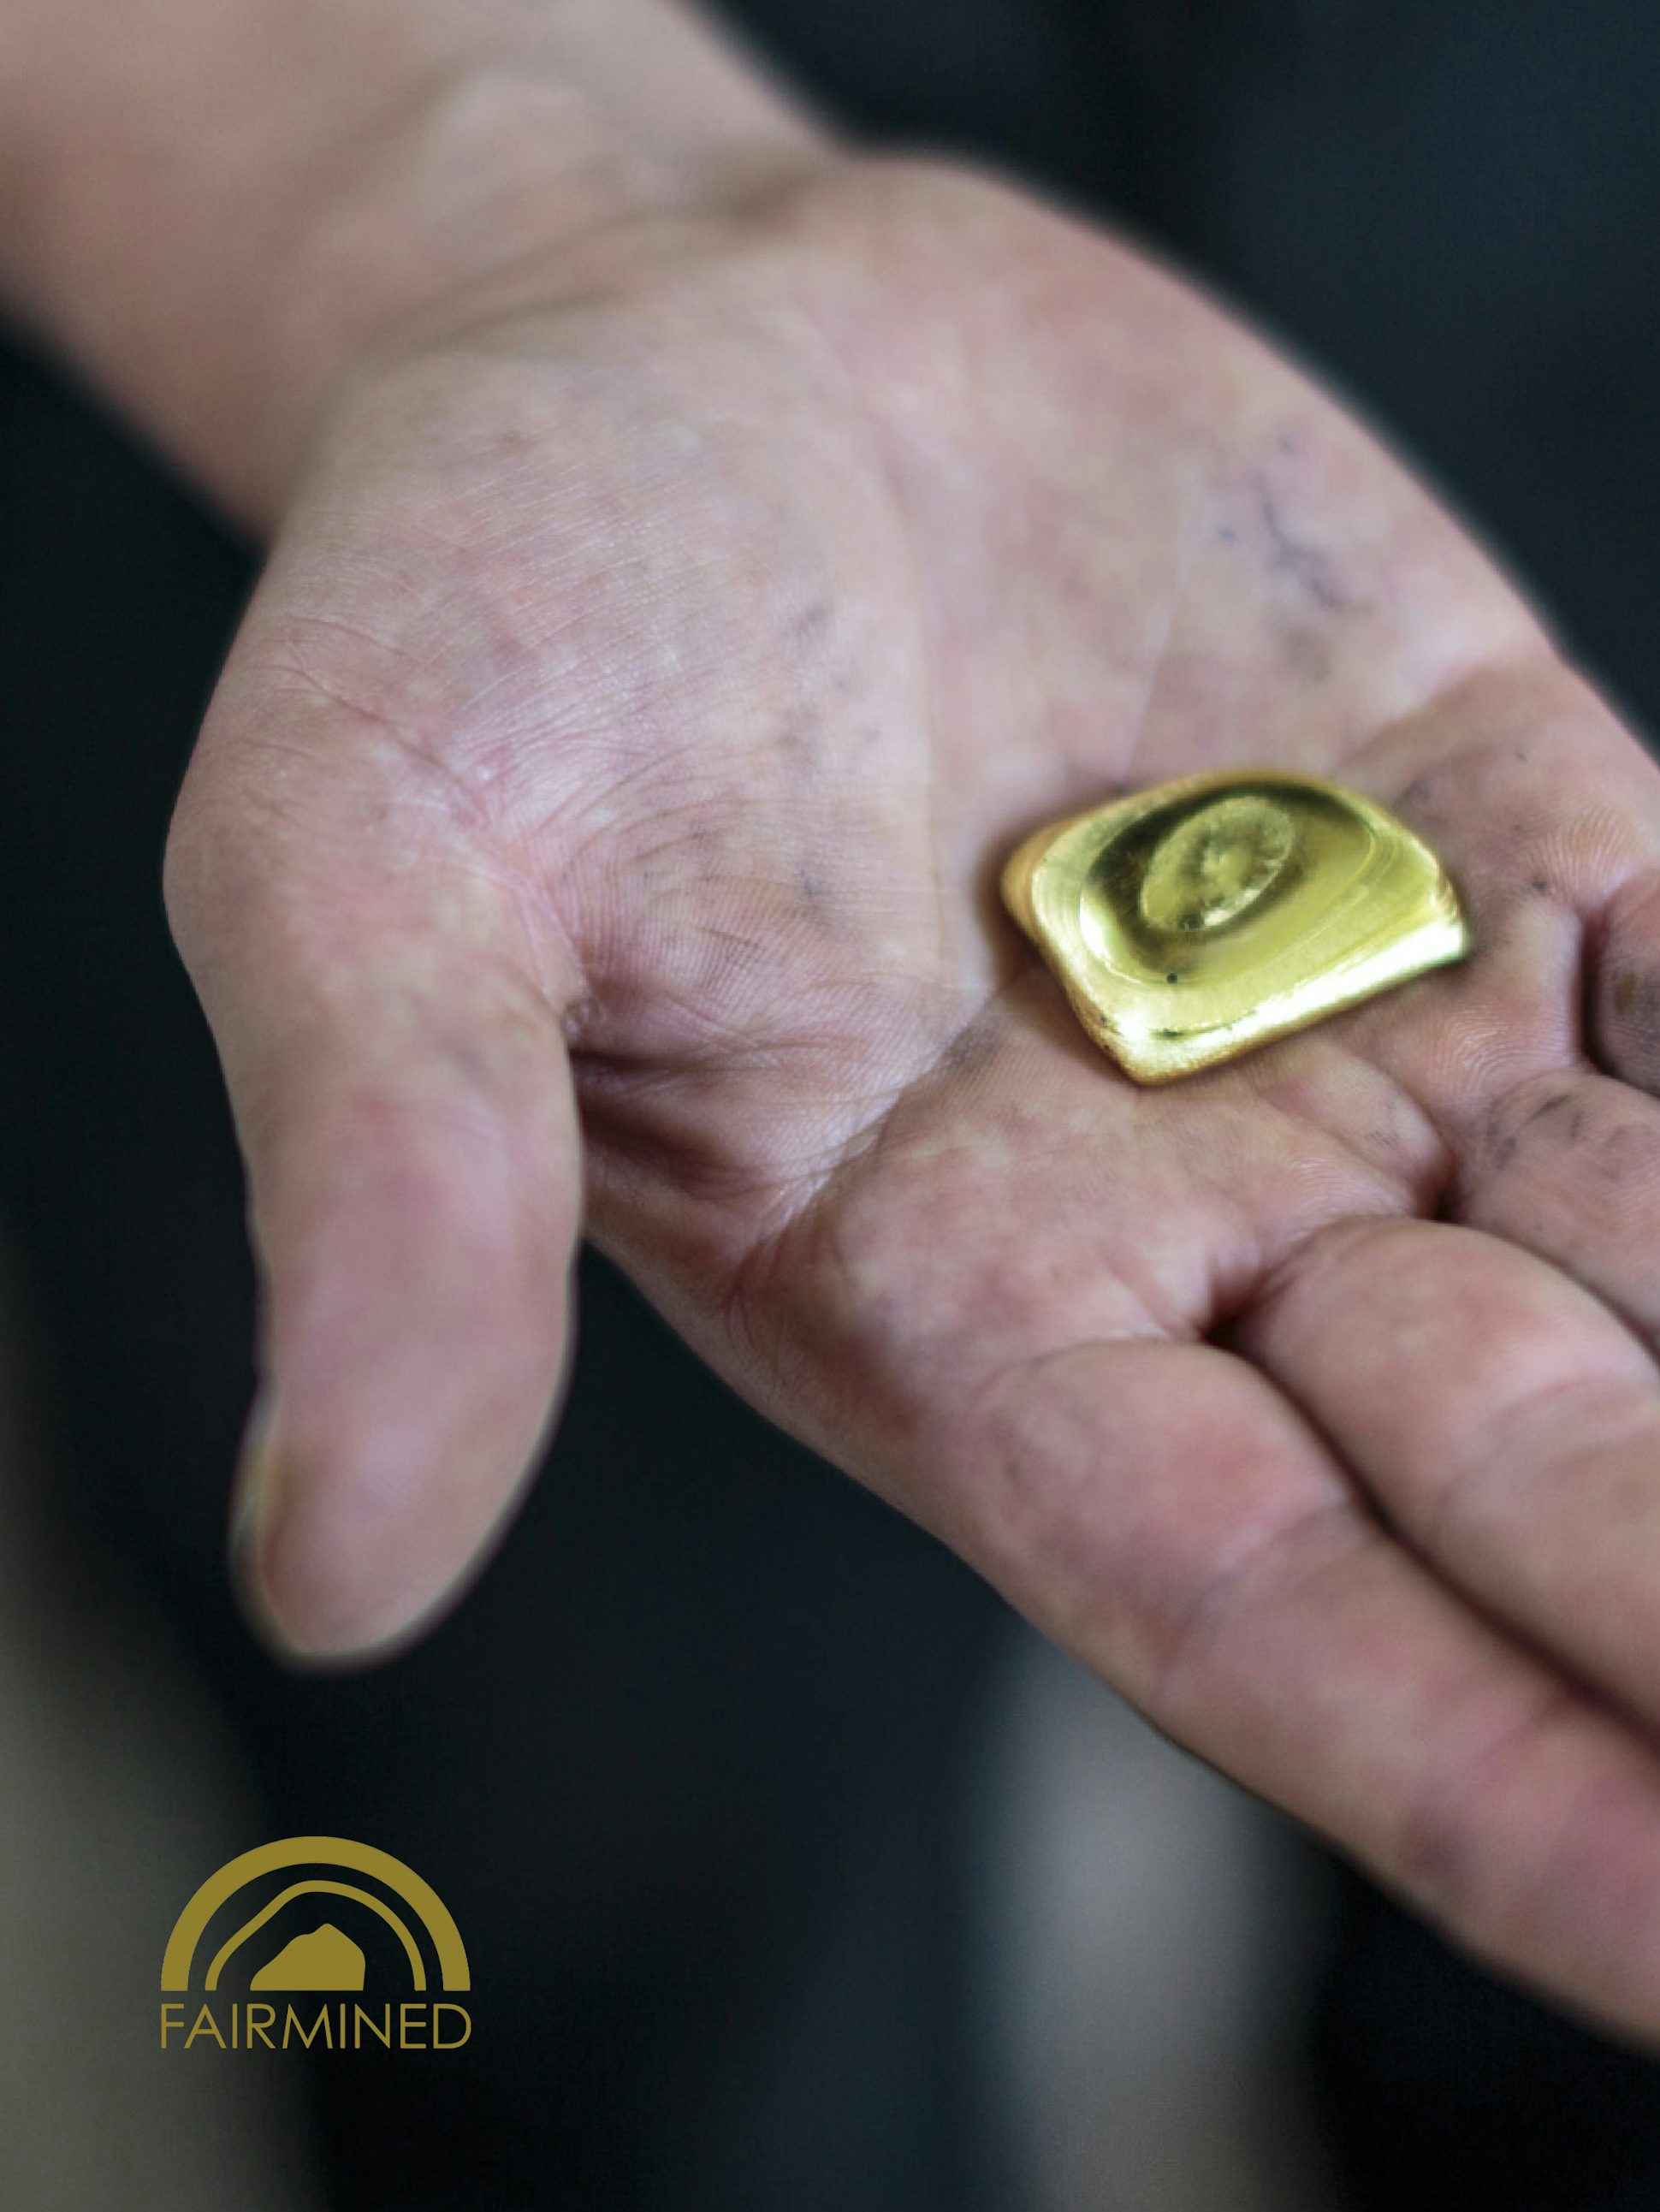 Fairmined certified ethical gold nugget - ARM (Alliance for Responsible Mining)